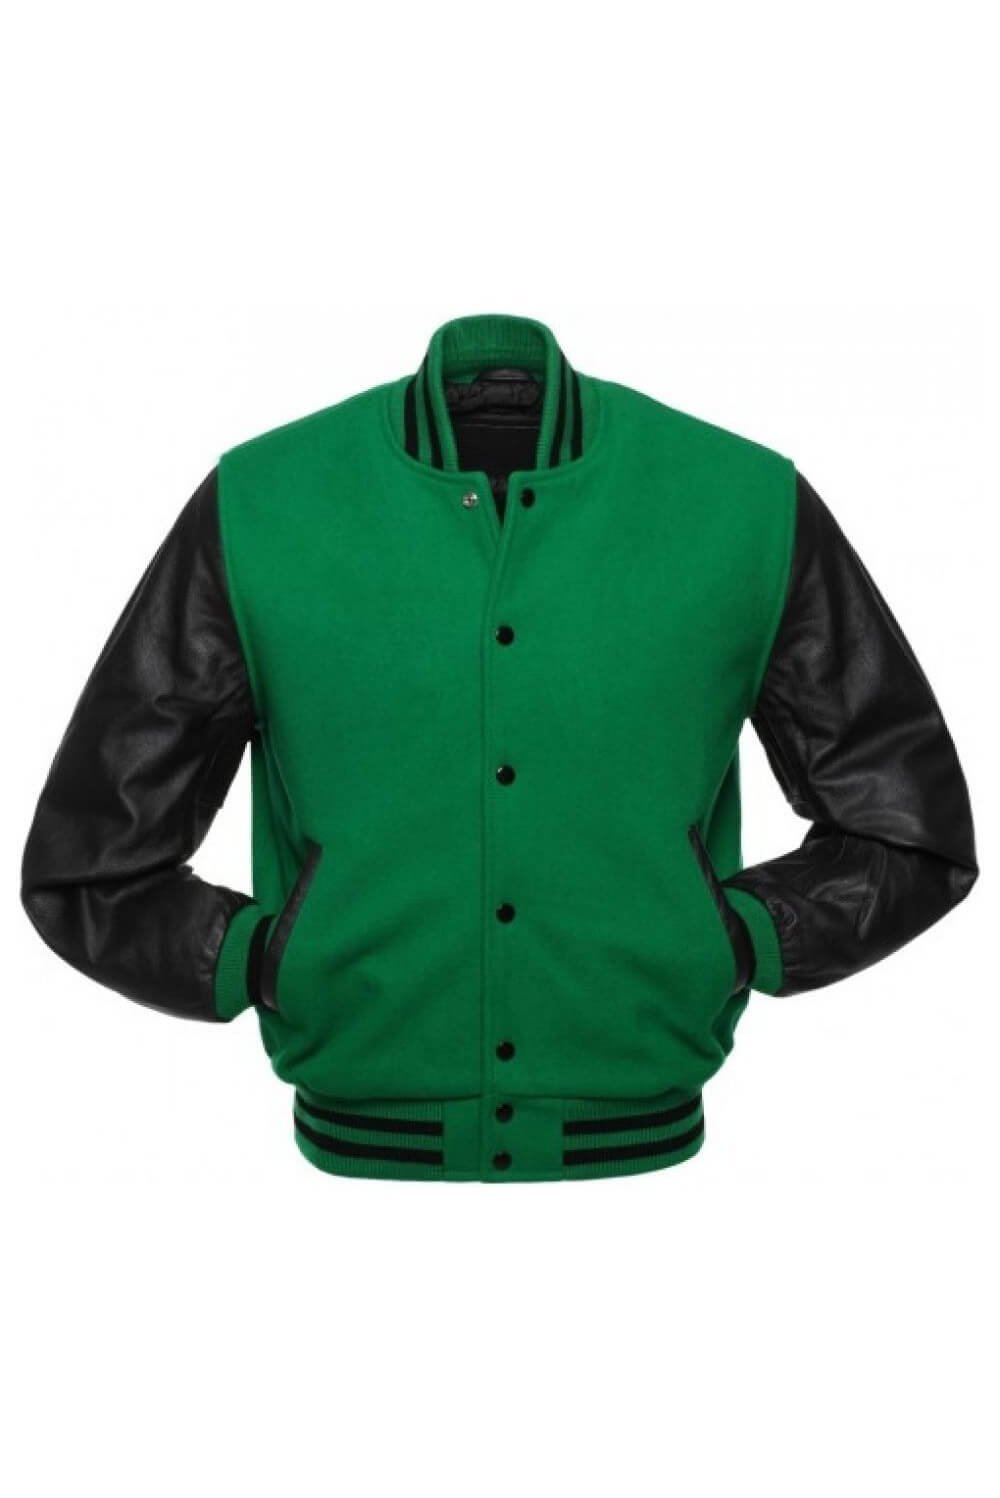 Hunter Green Letterman Jacket with White Leather Sleeves - Graduation  SuperStore